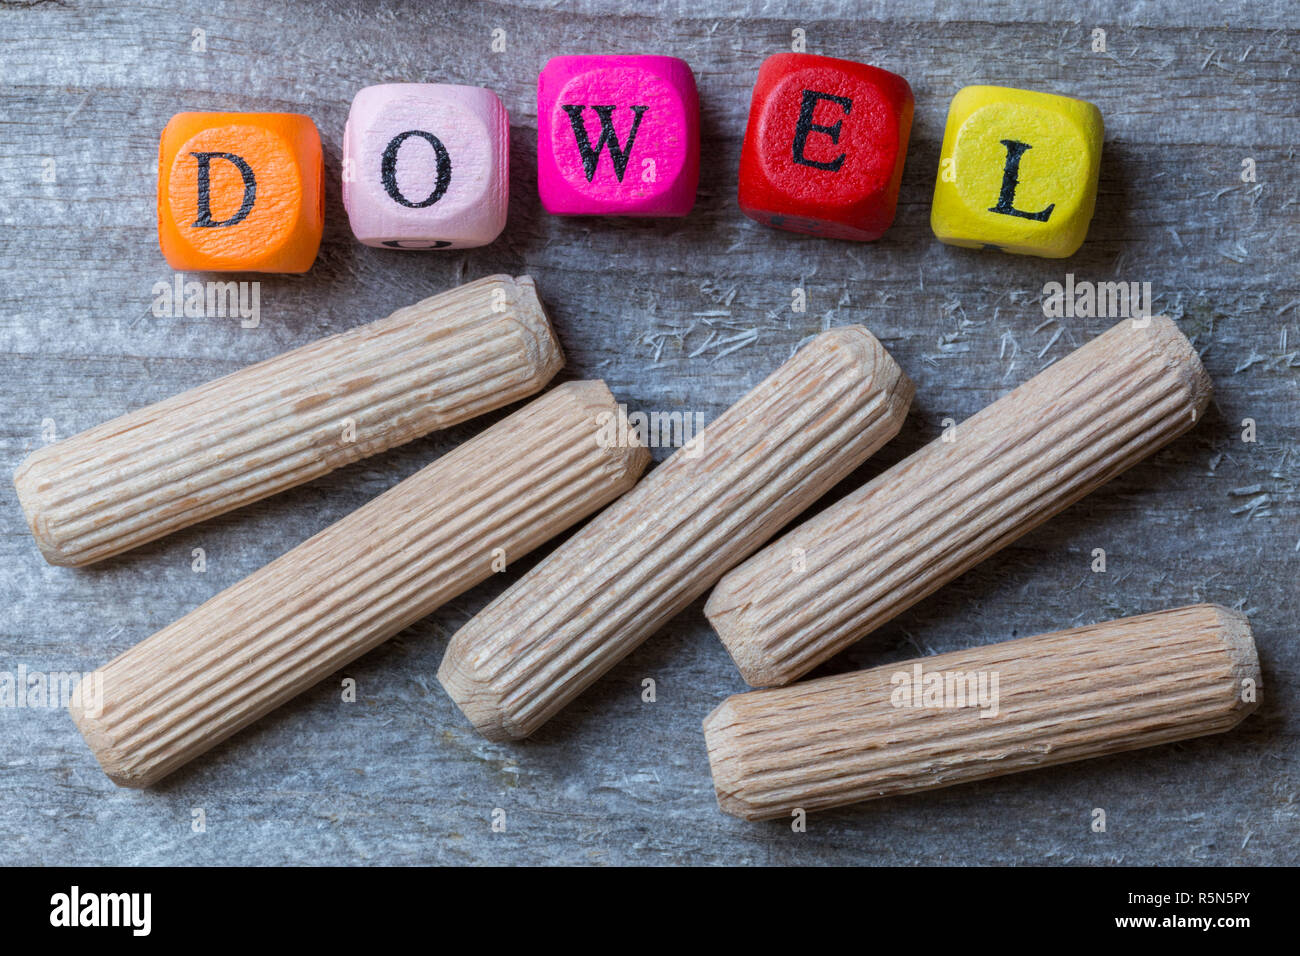 dowel cubes and dowels on gray wood visualization Stock Photo